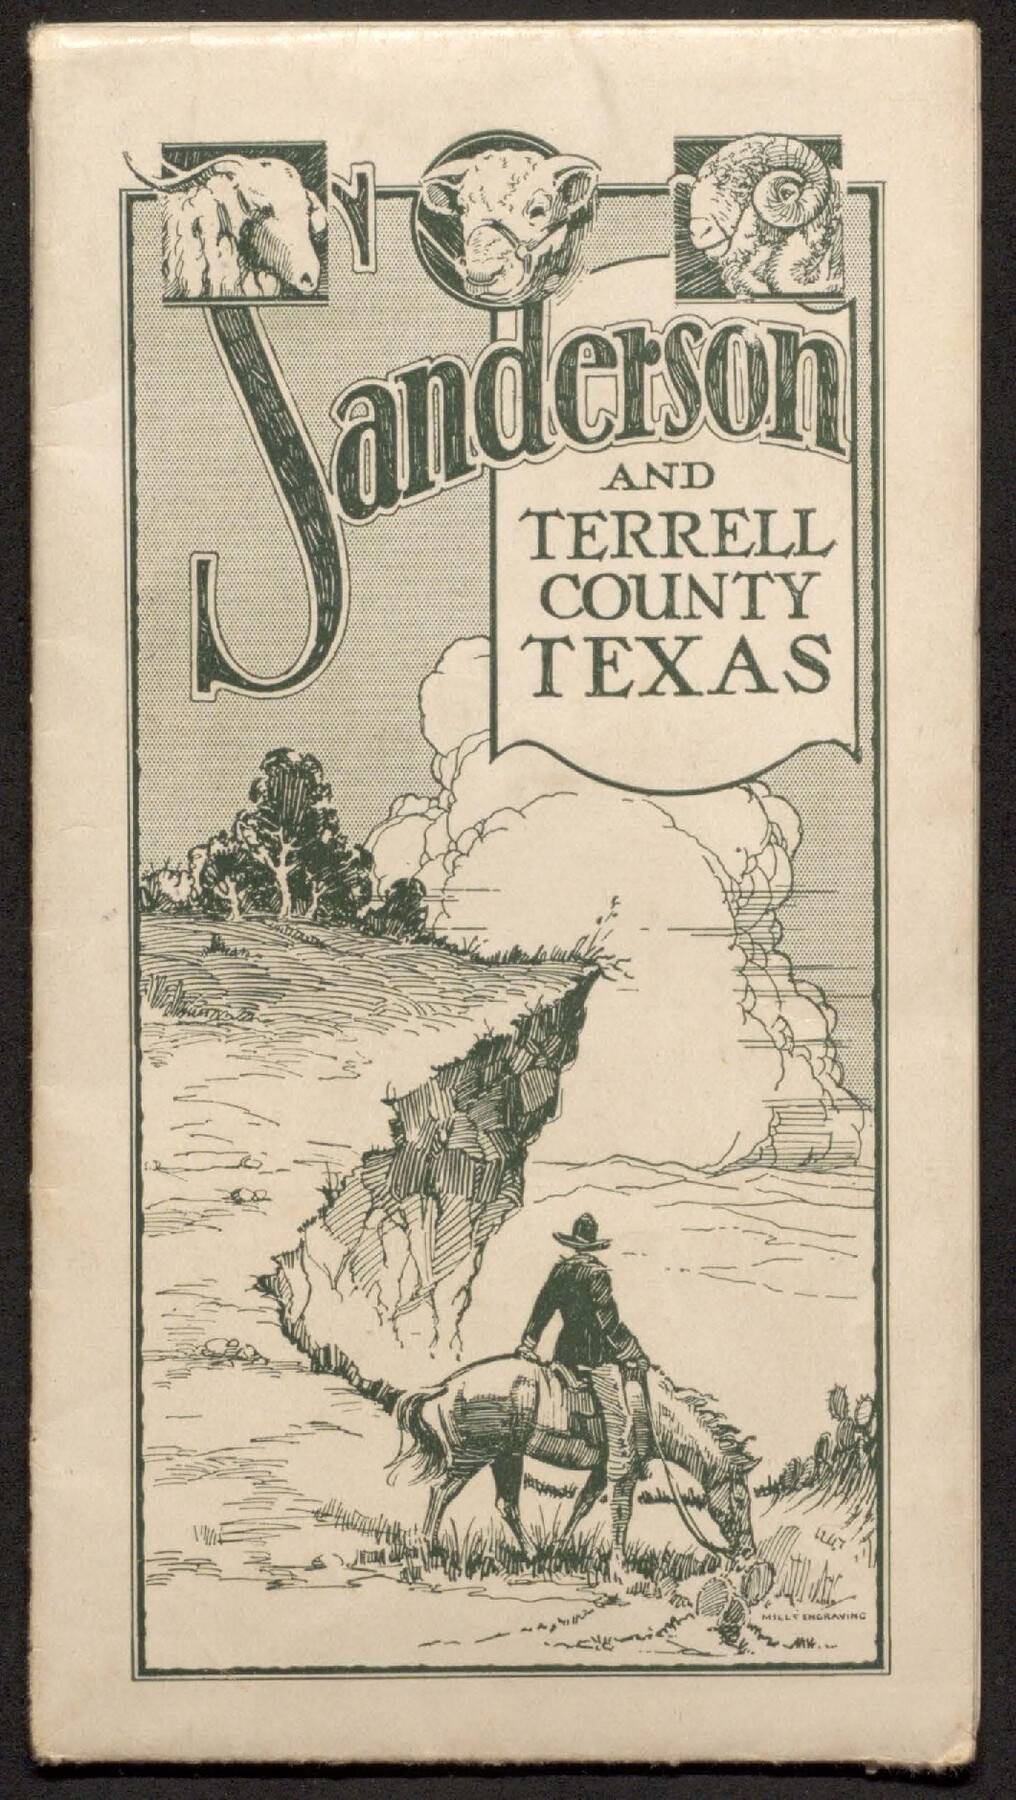 97073, Sanderson and Terrell County, Texas